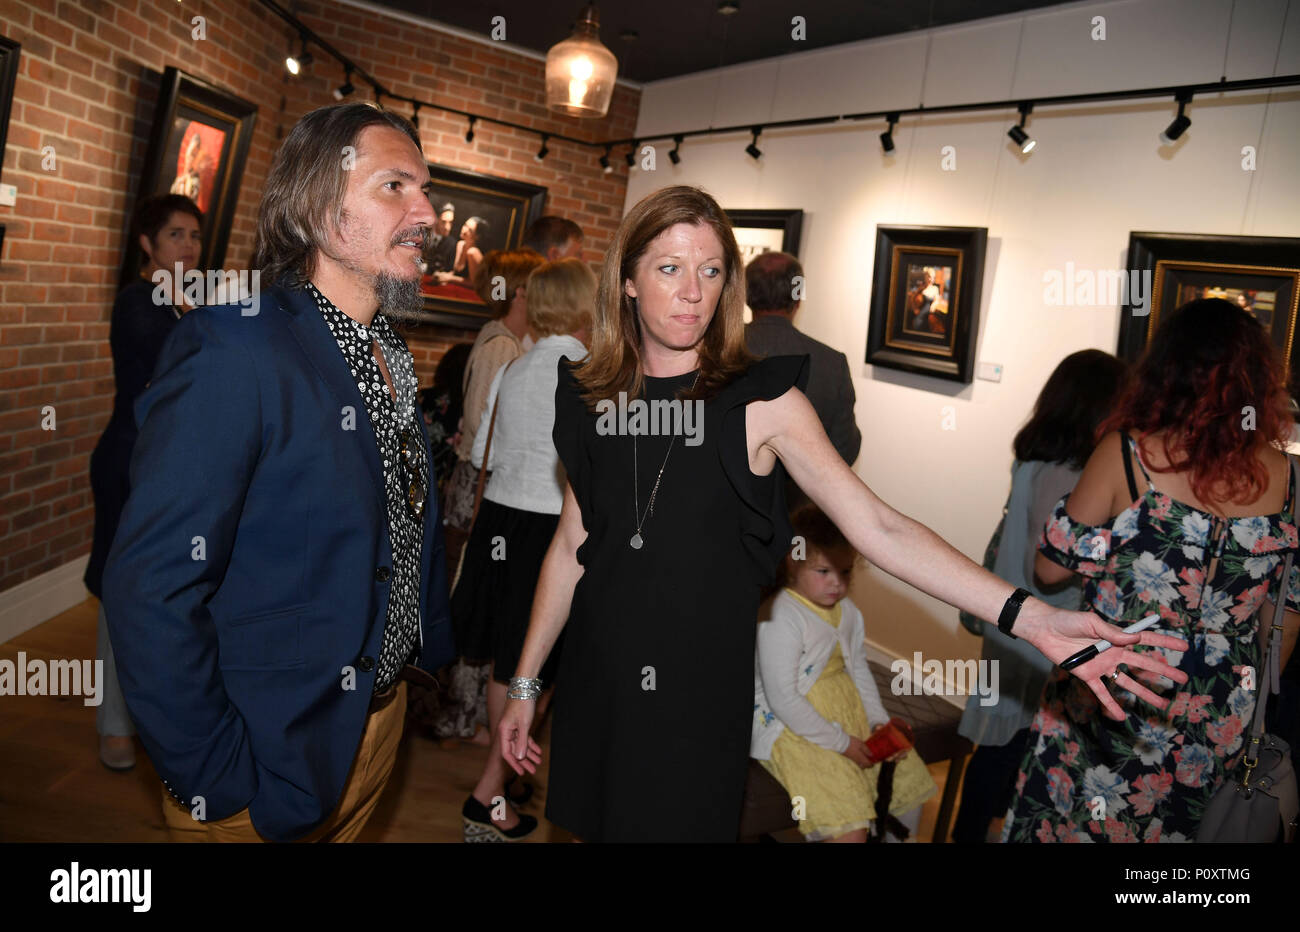 Leading figurative artist Fabian Perez during his countrywide tour unveiling his new collection of paintings Credit: Finnbarr Webster/Alamy Live News Stock Photo